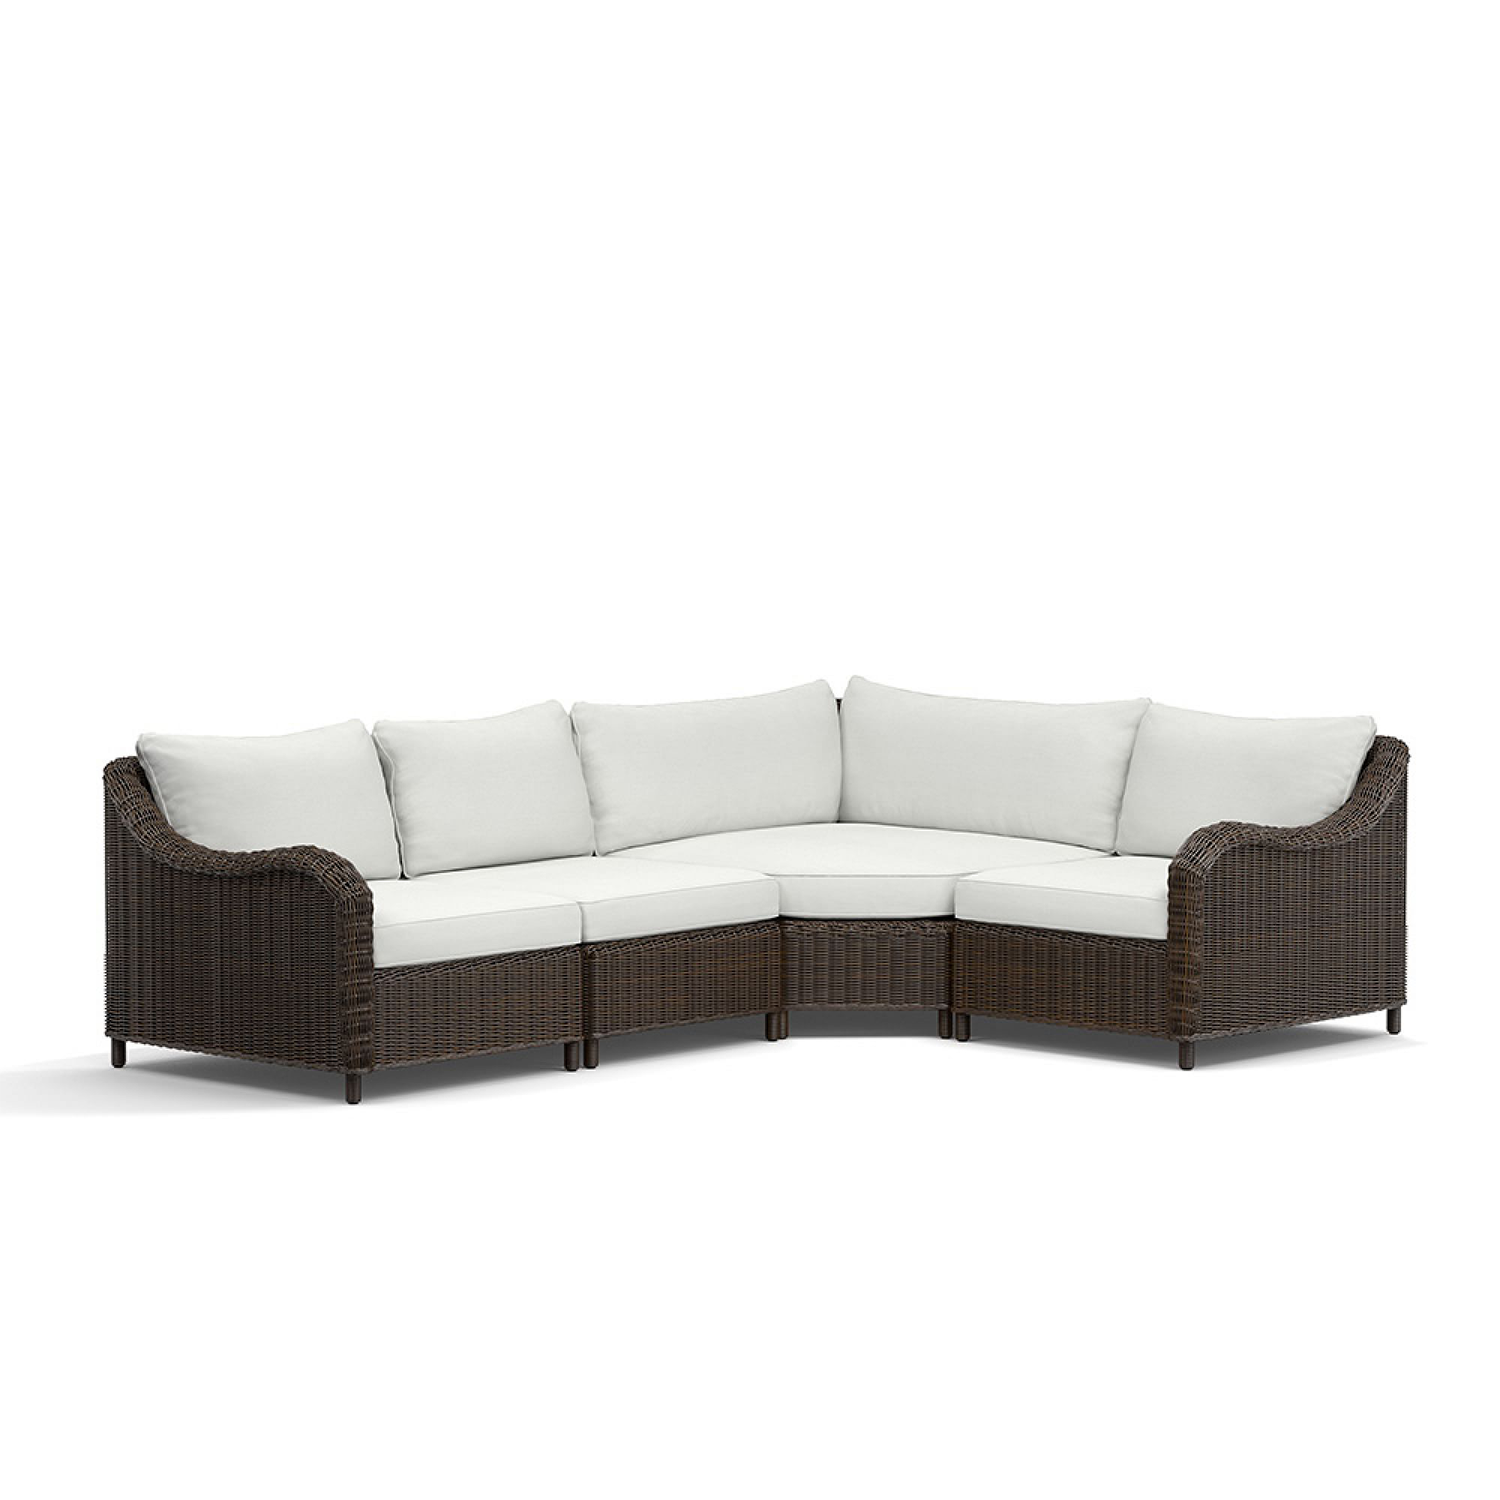 Pottery Barn Torrey sectional